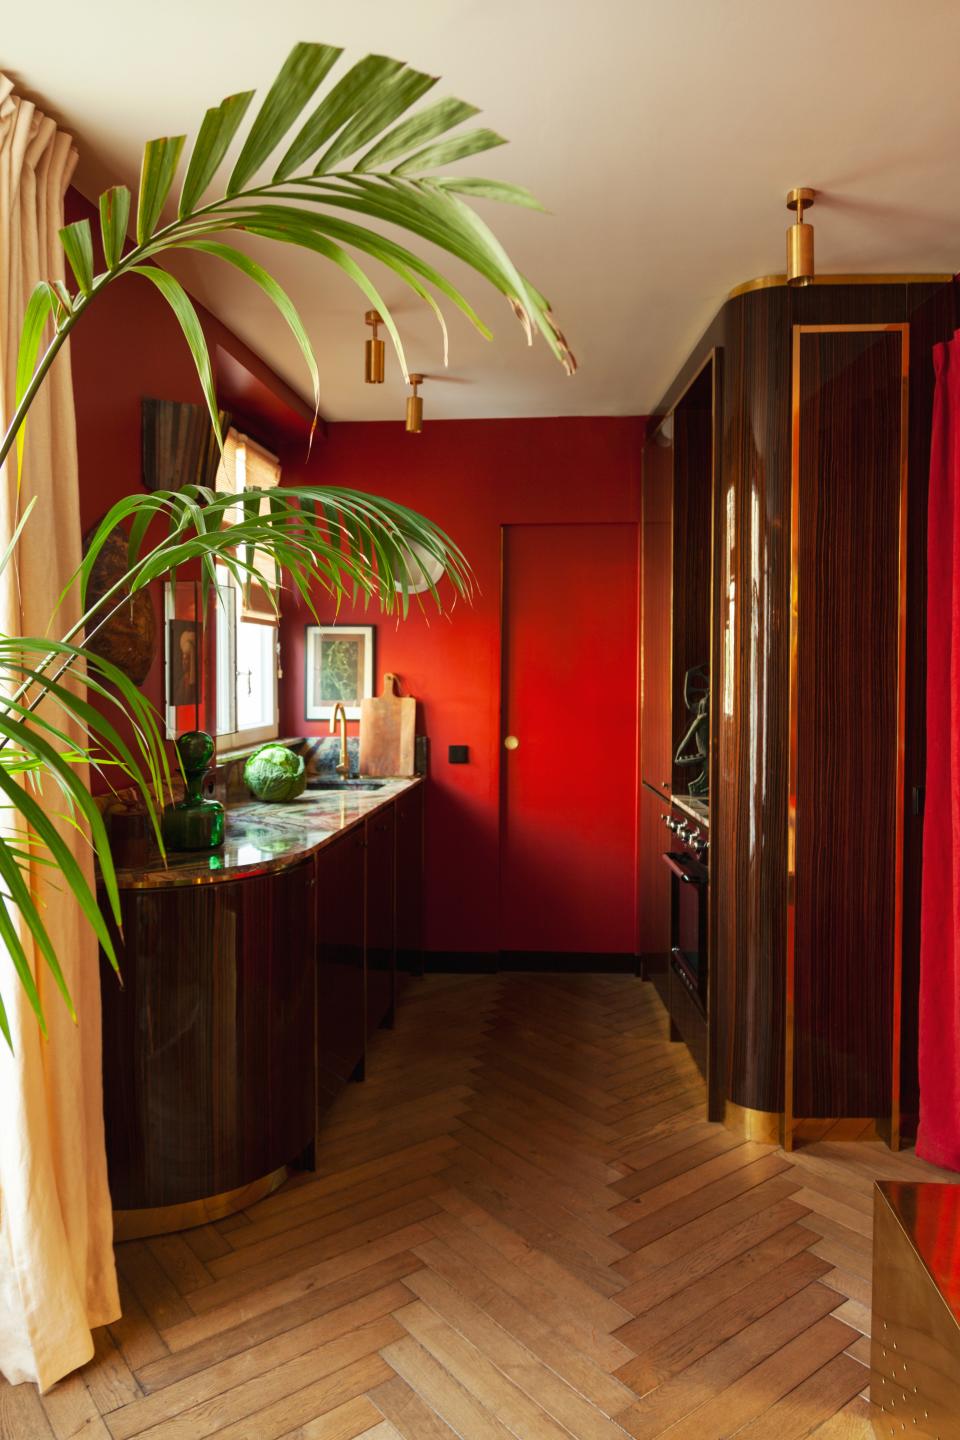 In the kitchen, the red color and lacquered wood give the feeling of being on a train or in a boat. The wall lighting fixture was designed by Hugo Toro and the curtains are by Silva Créations.